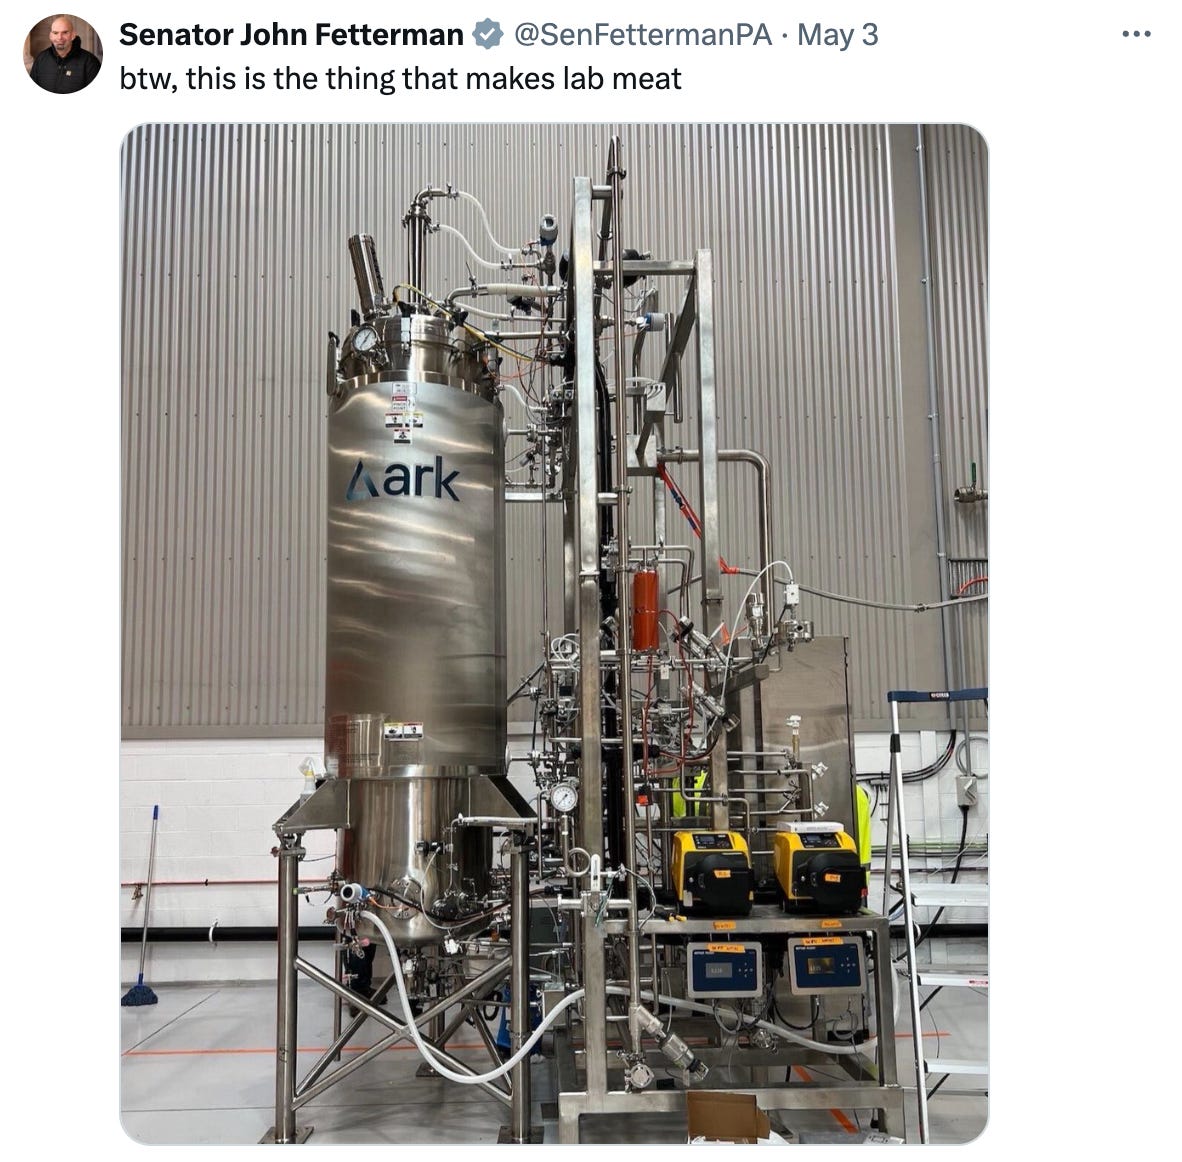 A screenshot of John Fetterman's tweet saying "btw, this is the thing that makes lab meat" with a photo of some metal machine.